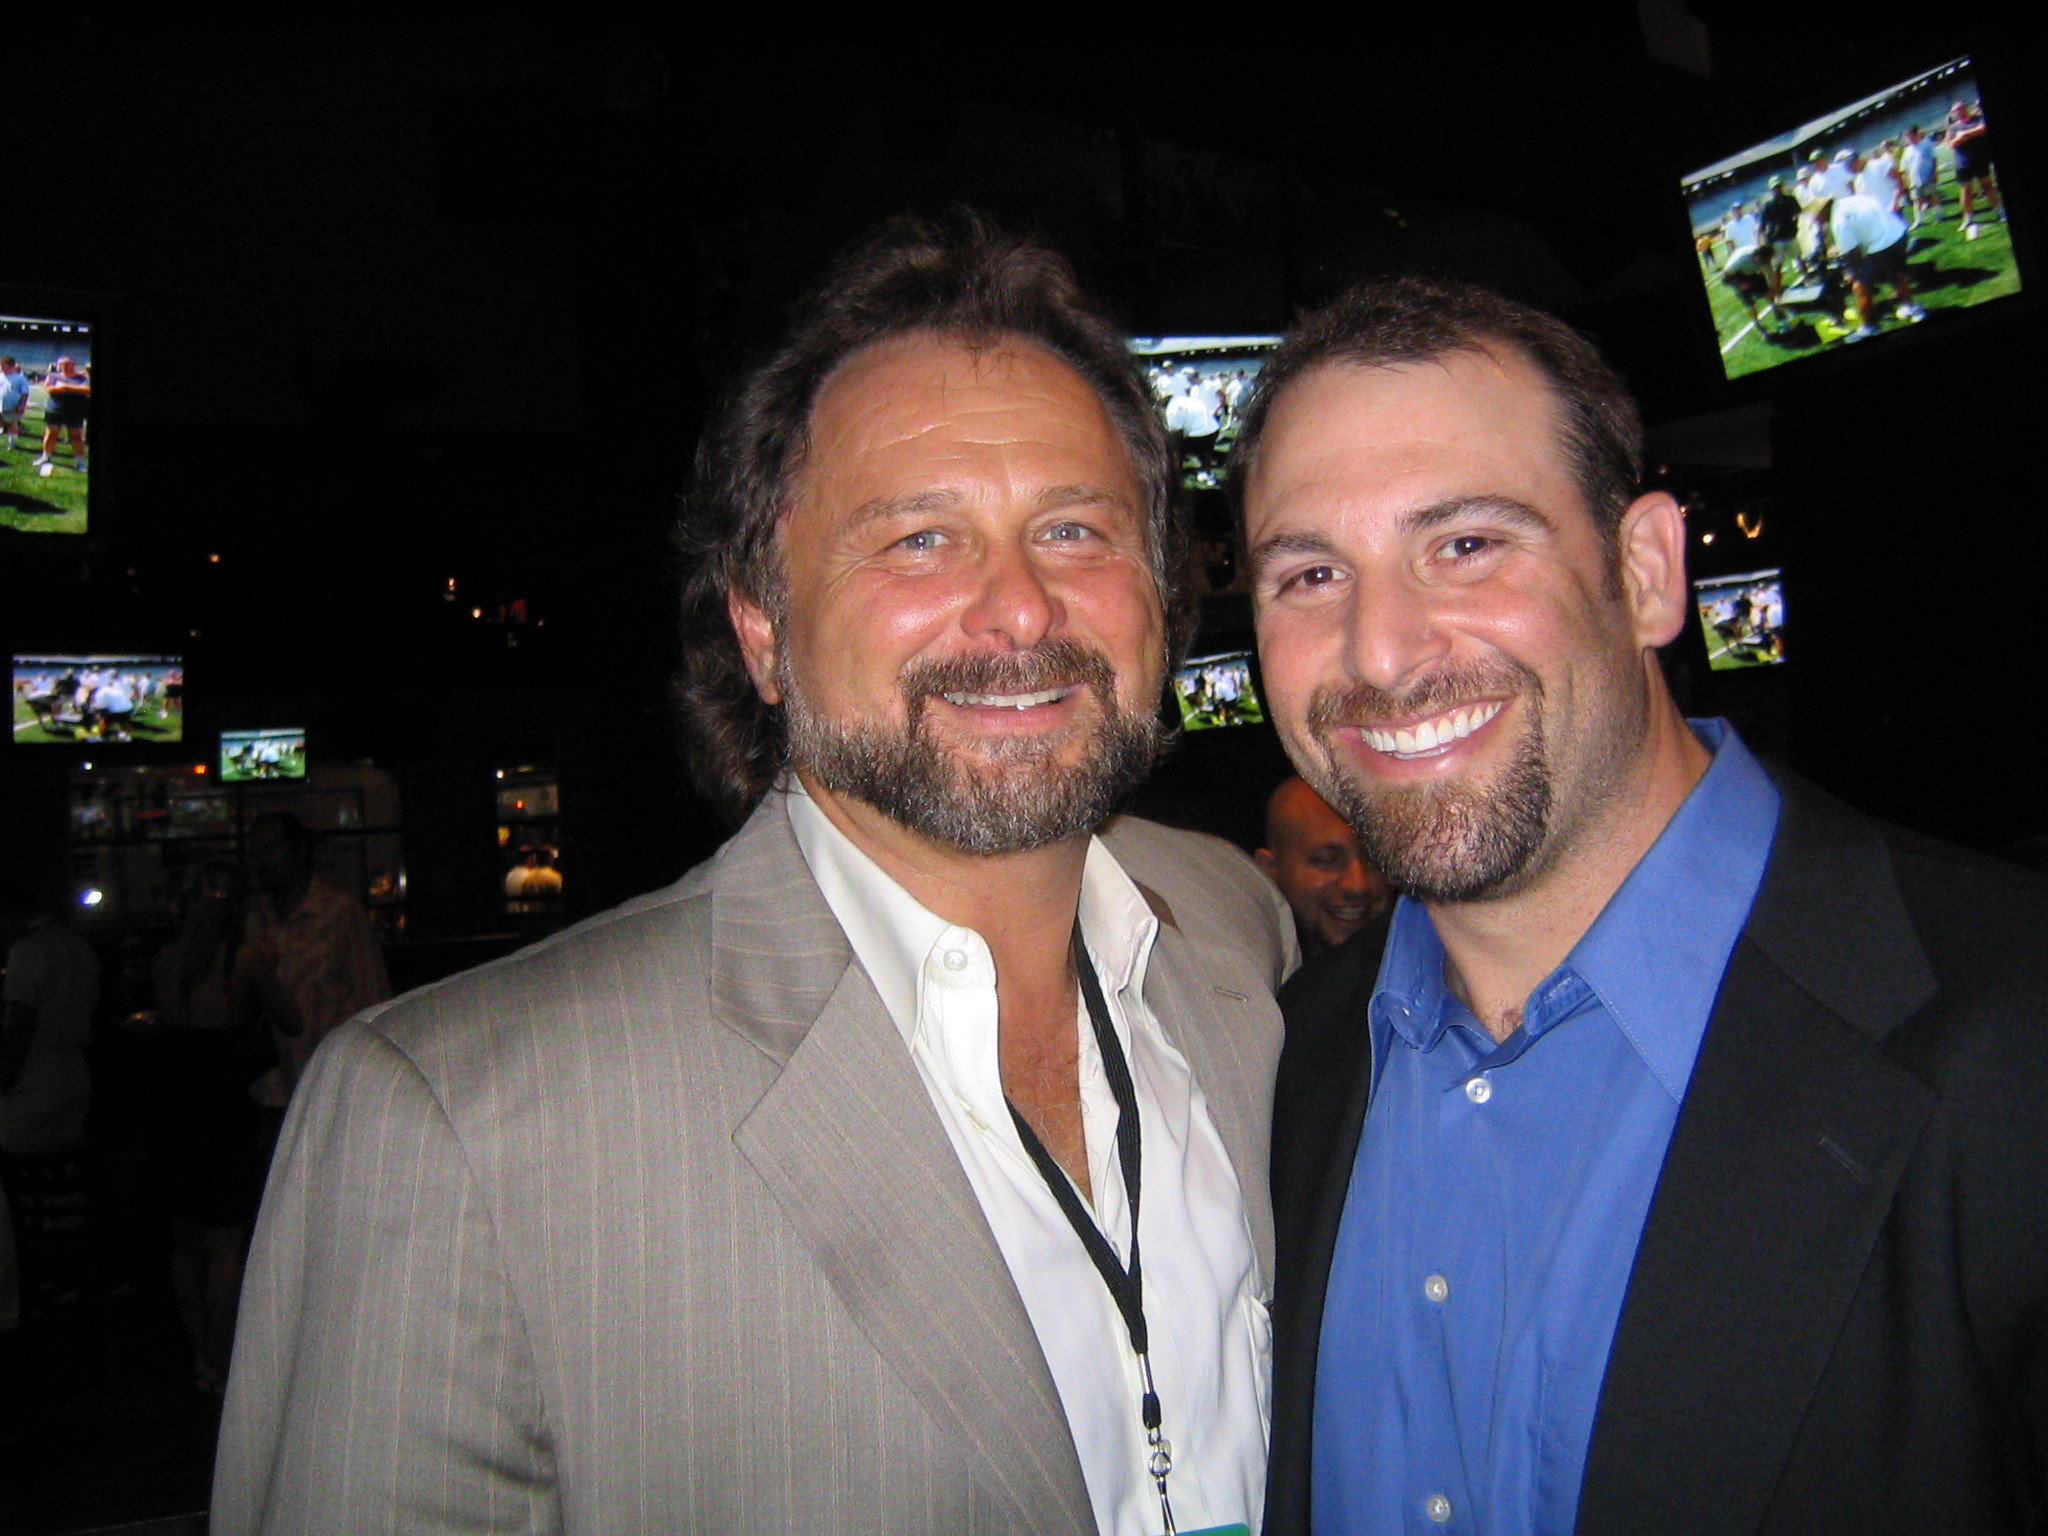 Stink and Denny Franks at the Invincible Premiere, NYC 2006.